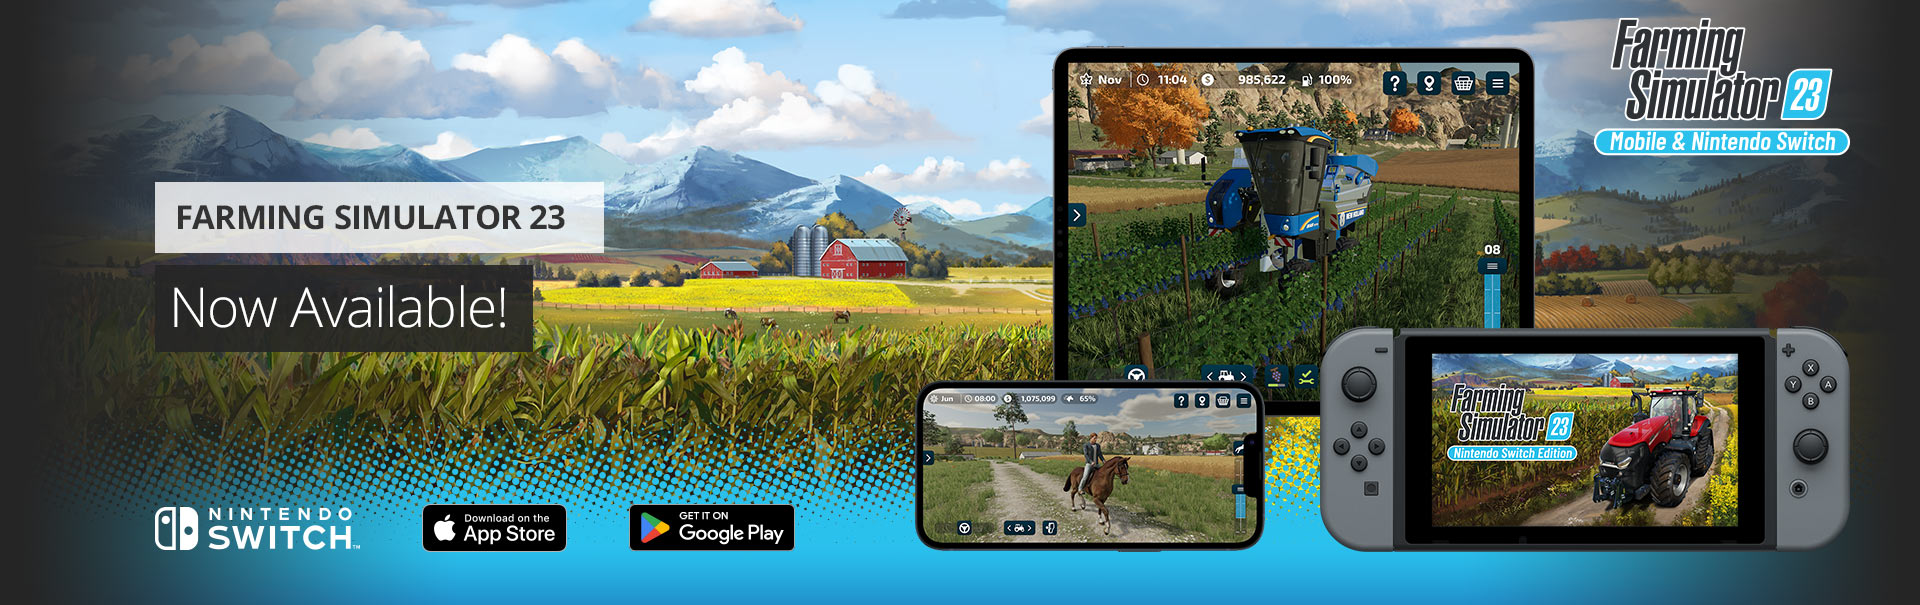 Farming Simulator 23 - Now Available